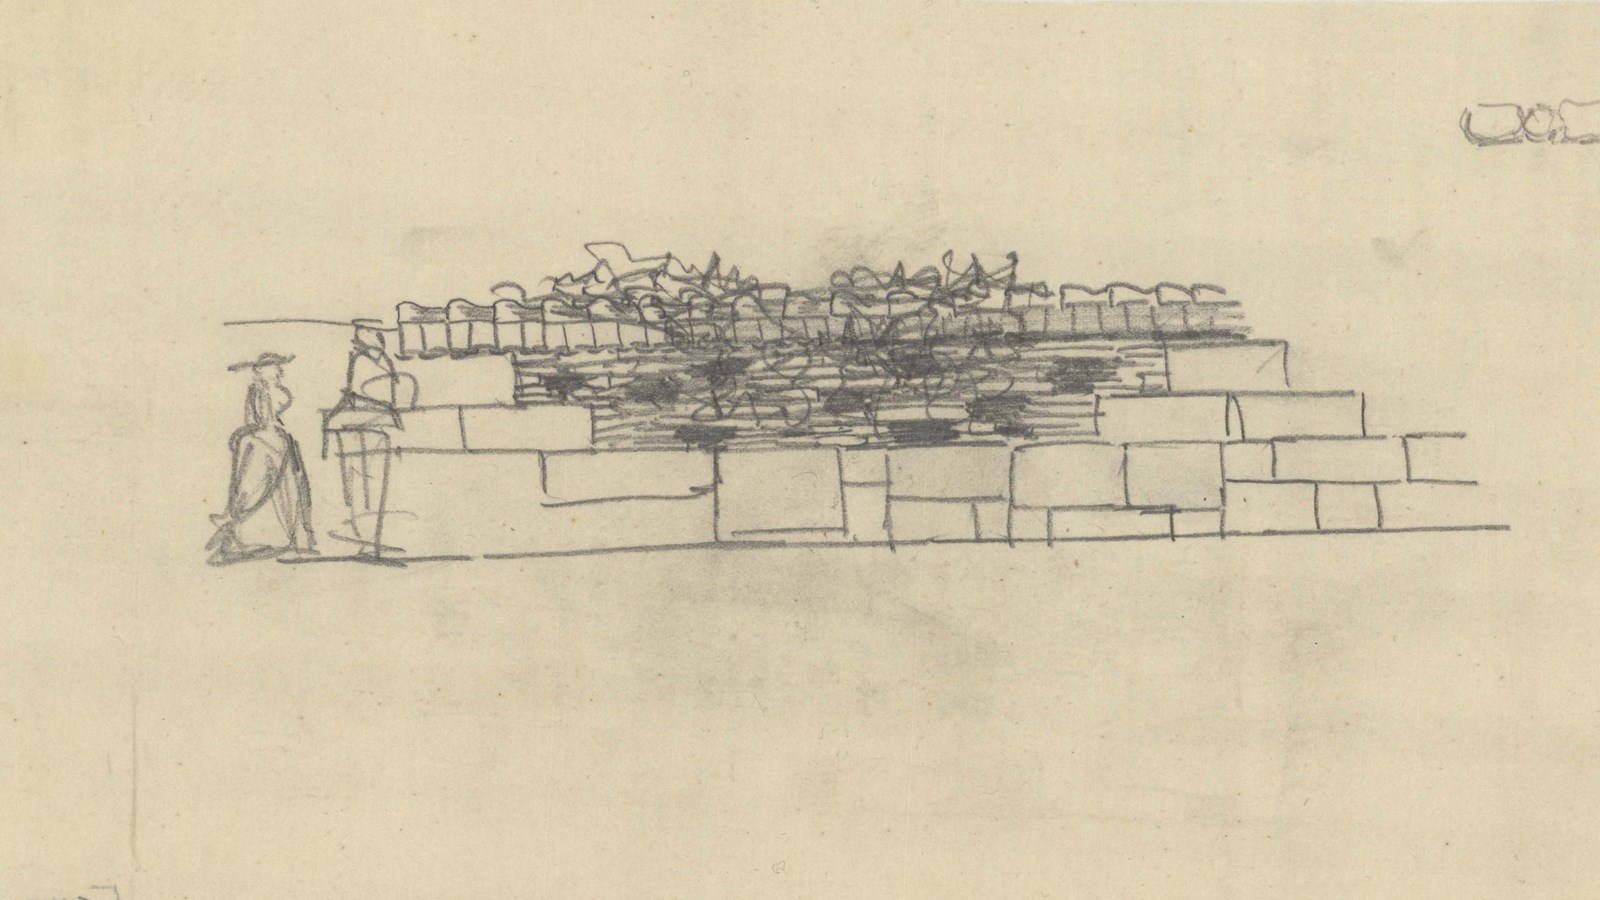 Pencil sketch of bridge of stone with man and woman standing next to it